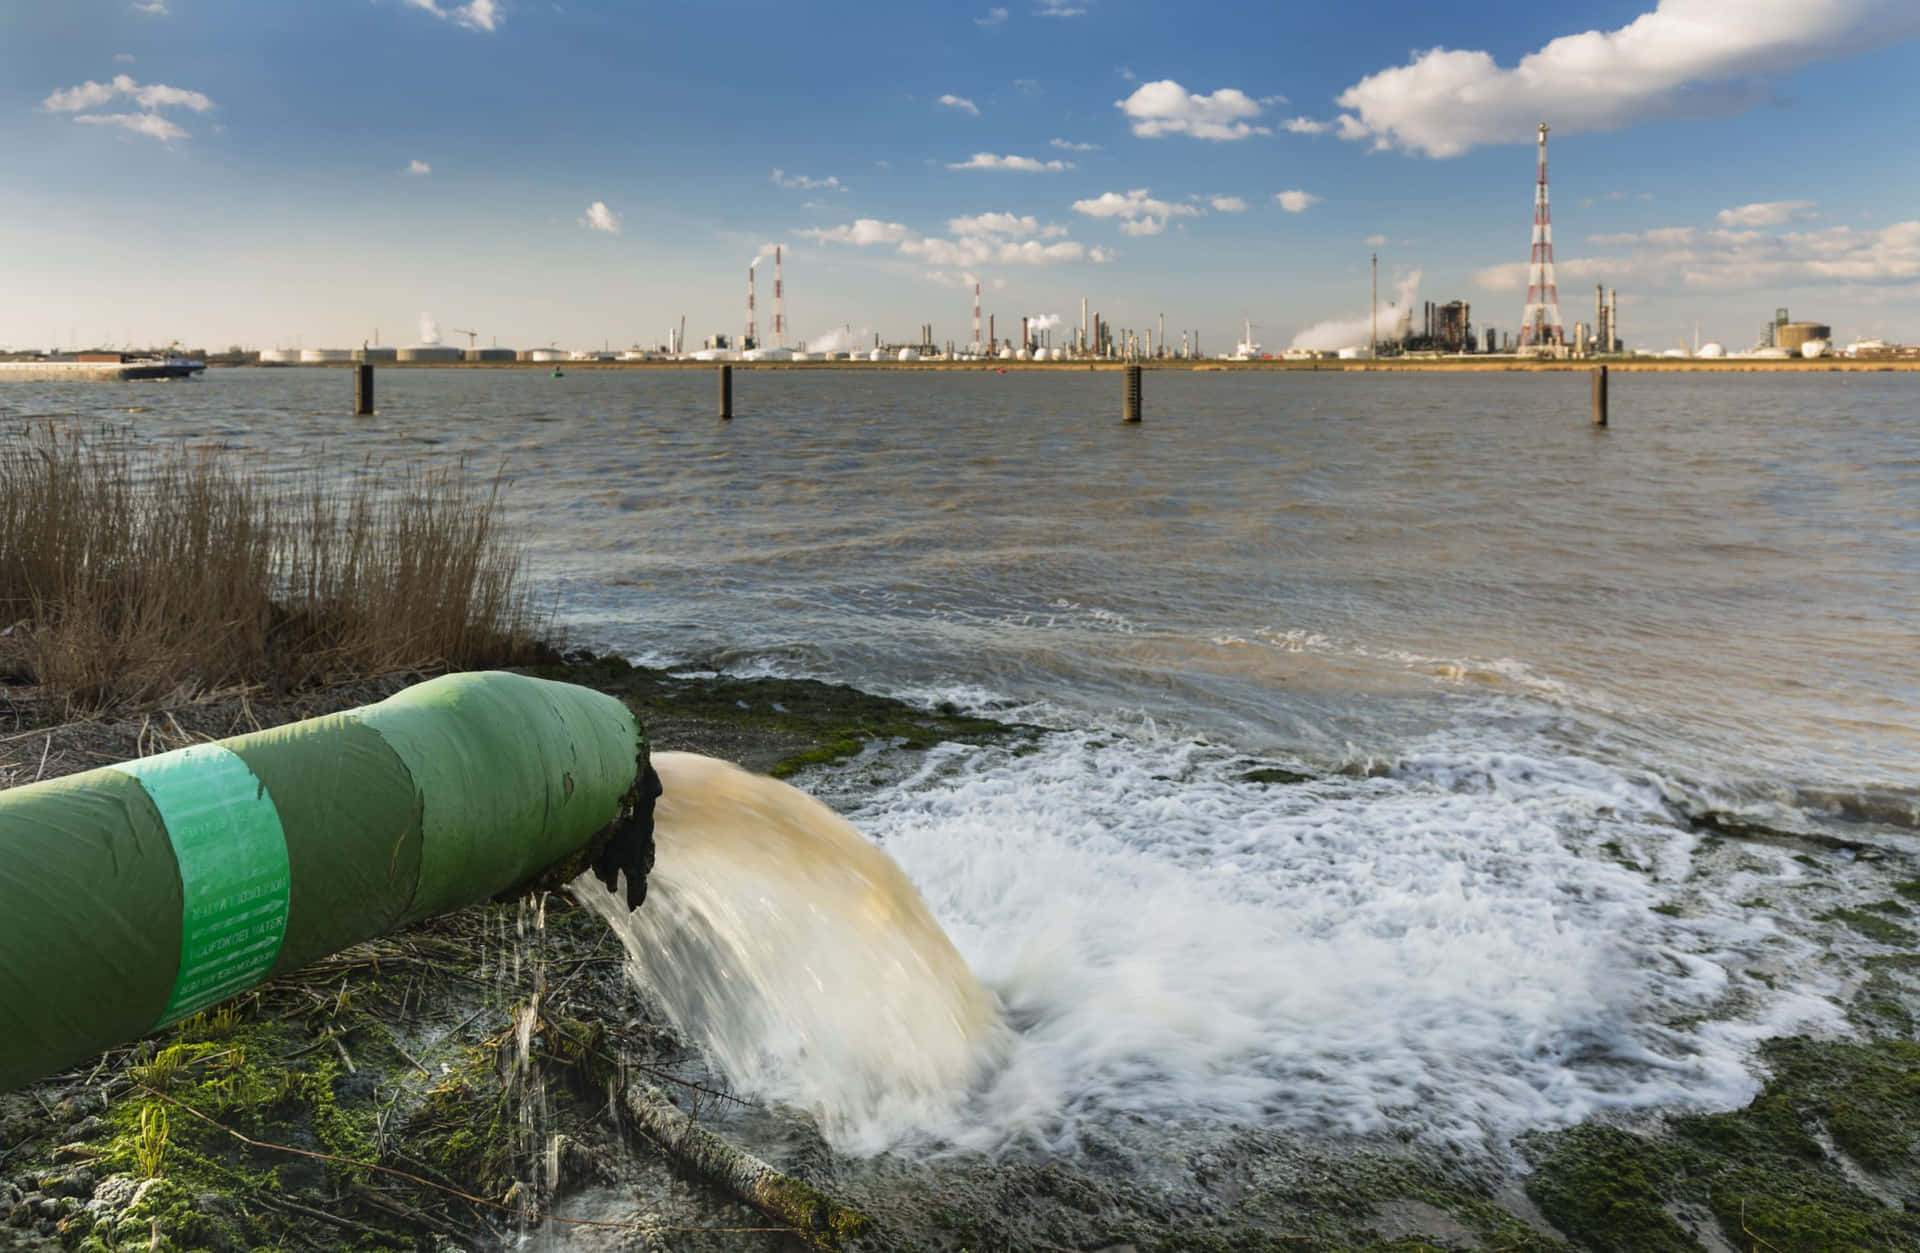 Water Pollution is a Dangerous Global Problem